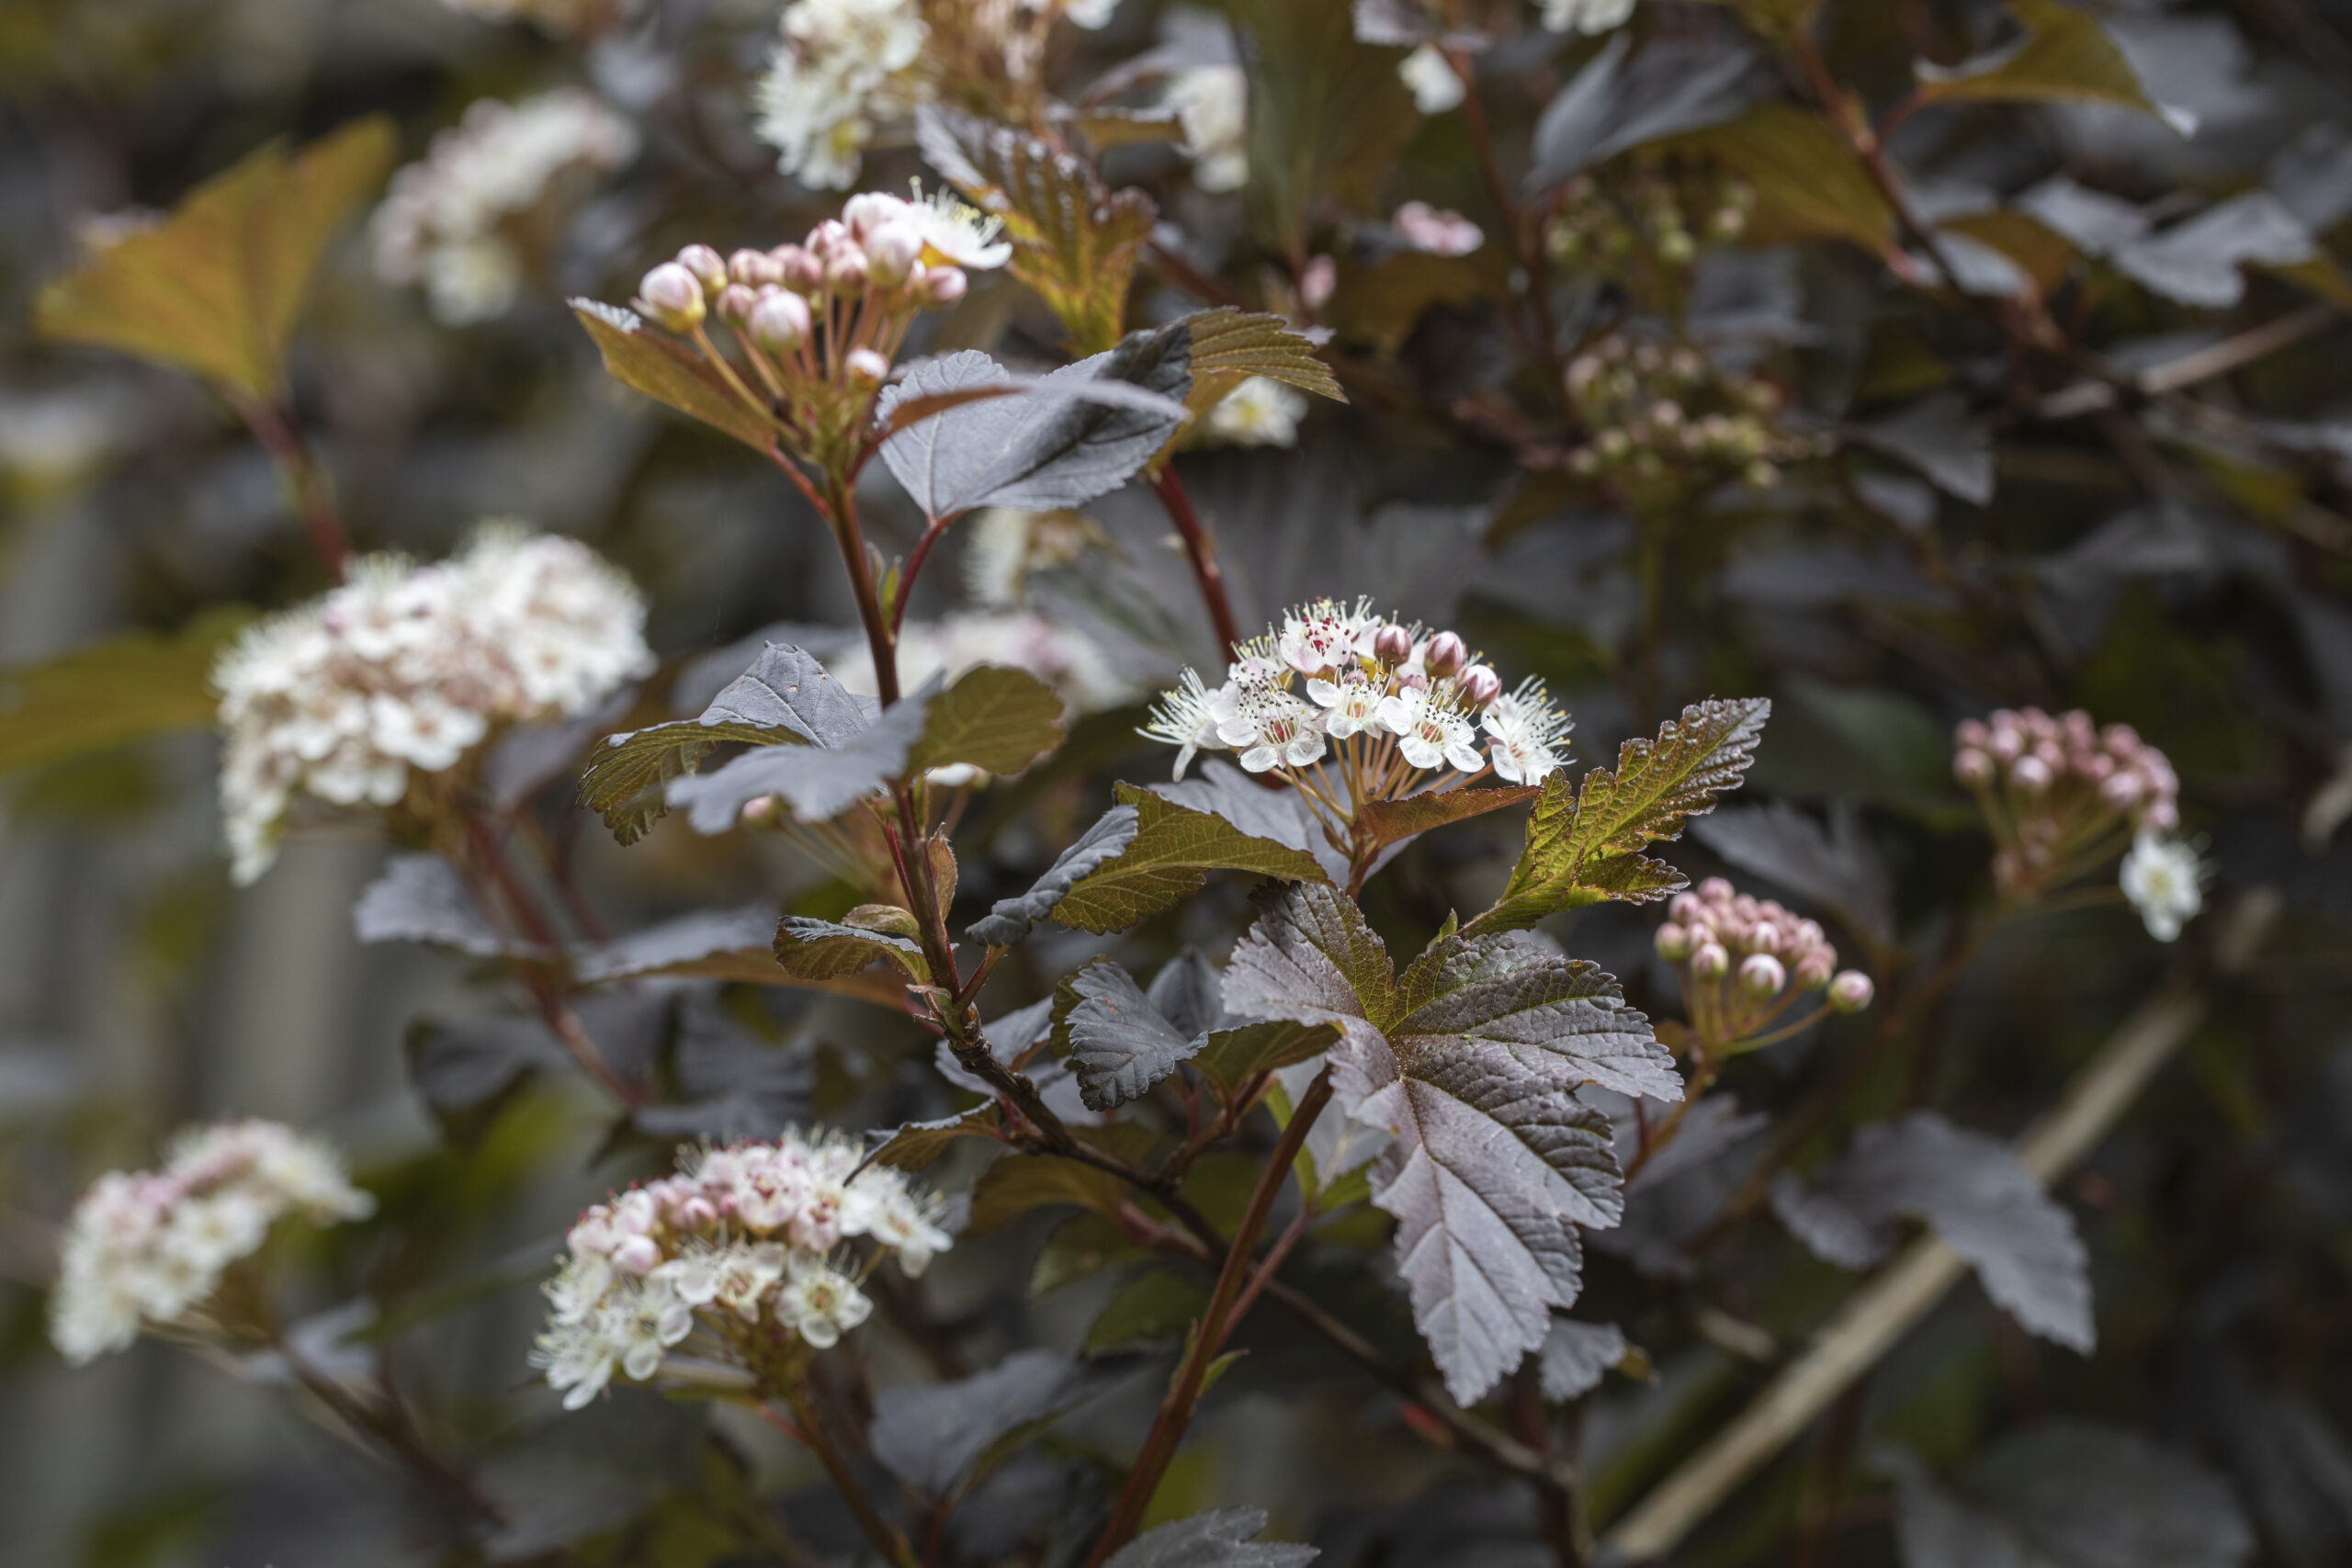 Blooming Ninebark bush with burgundy leaves and white flowers.